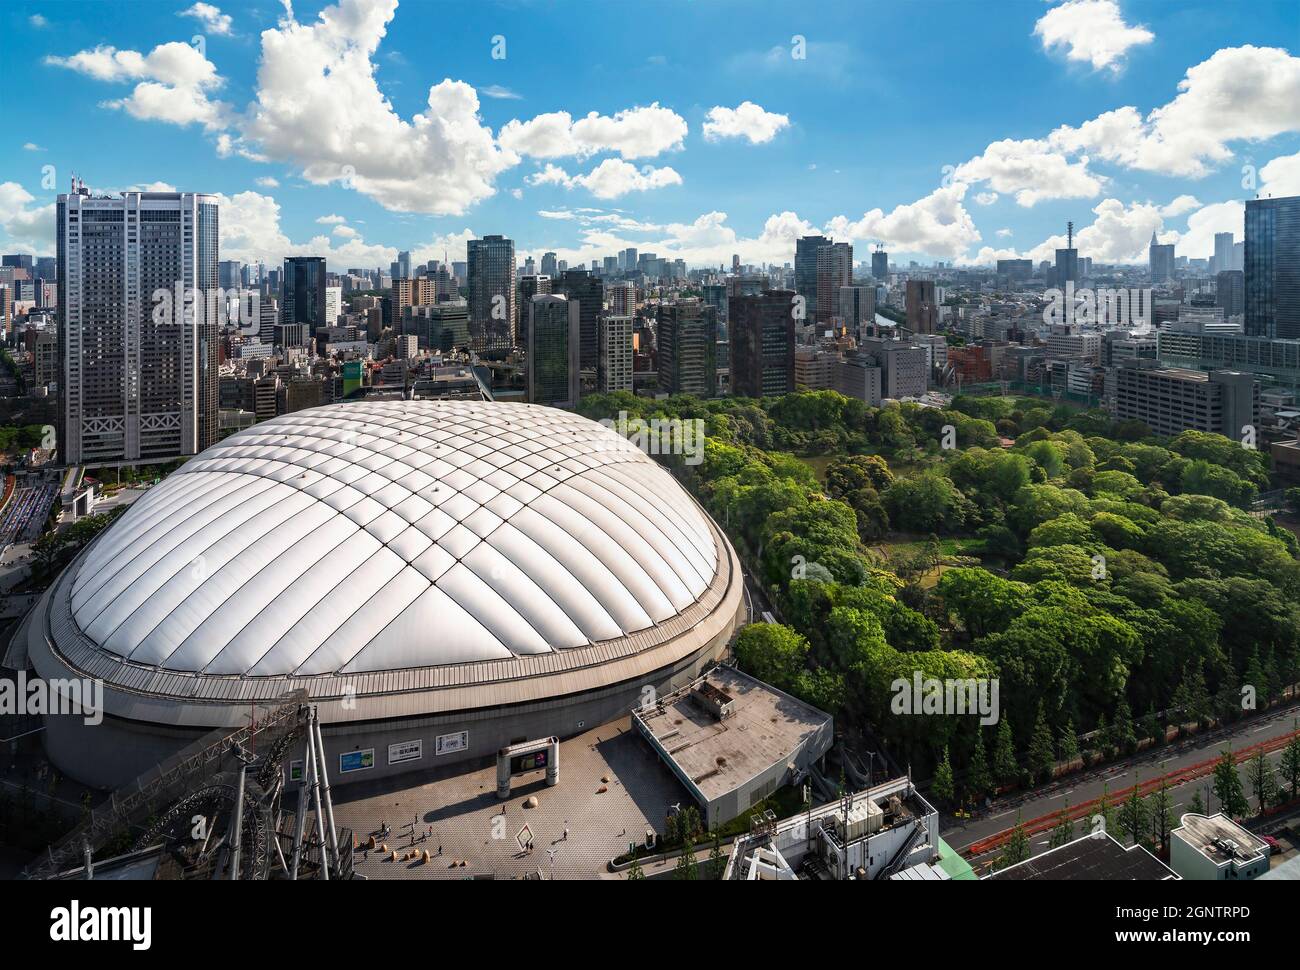 tokyo, japan - may 03 2021: Bird view of the Tokyo Dome stadium called The Big Egg part of shopping center Laqua Tokyo Dome City Mall in kourakuen asi Stock Photo